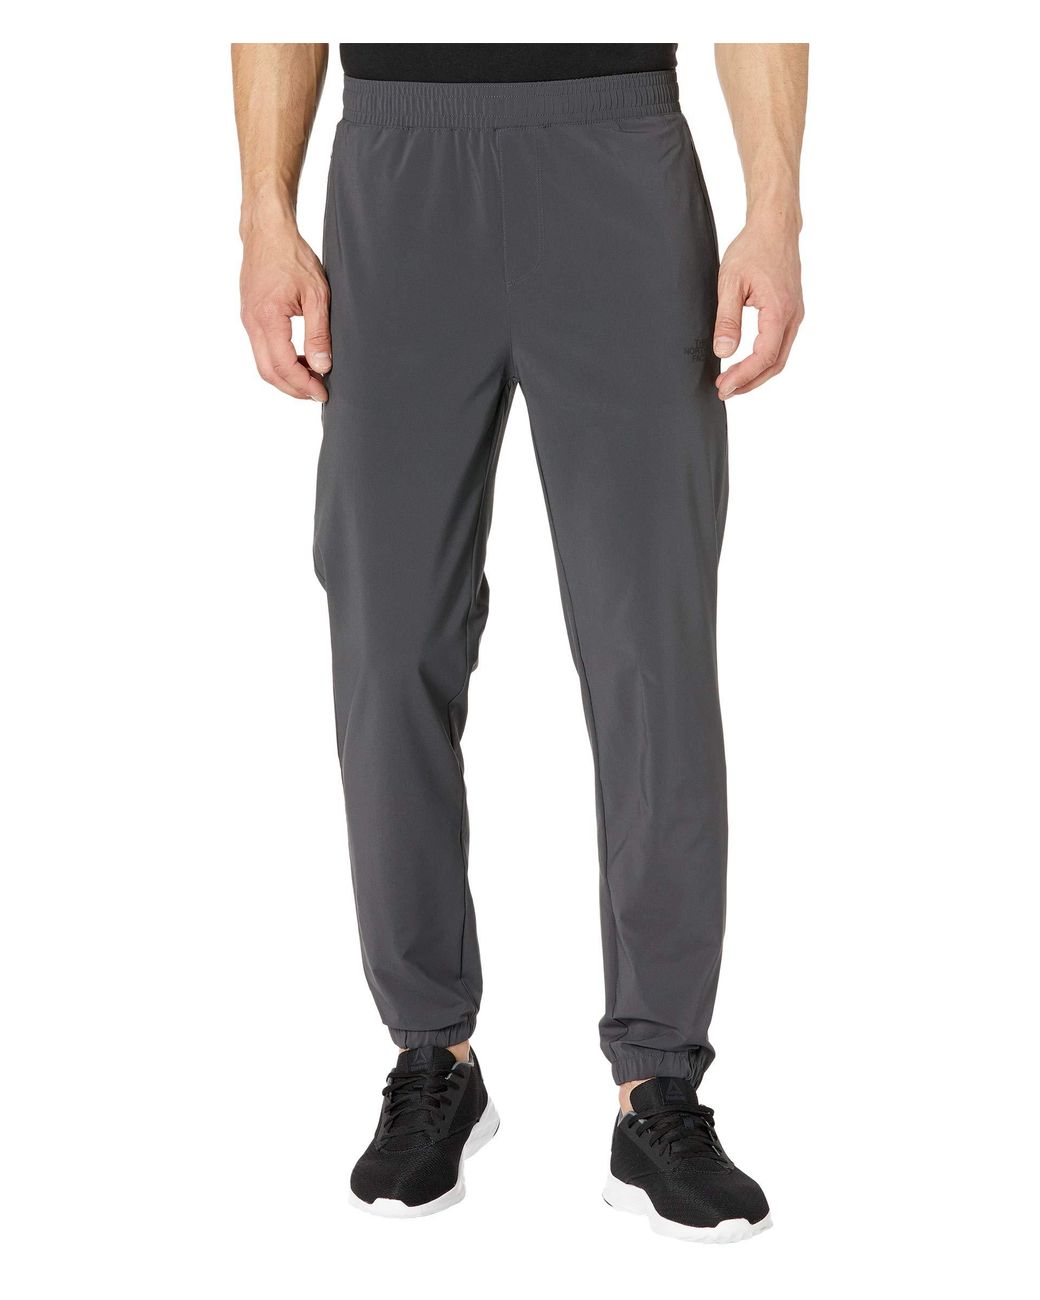 The North Face Wander Pants in Gray for Men - Lyst